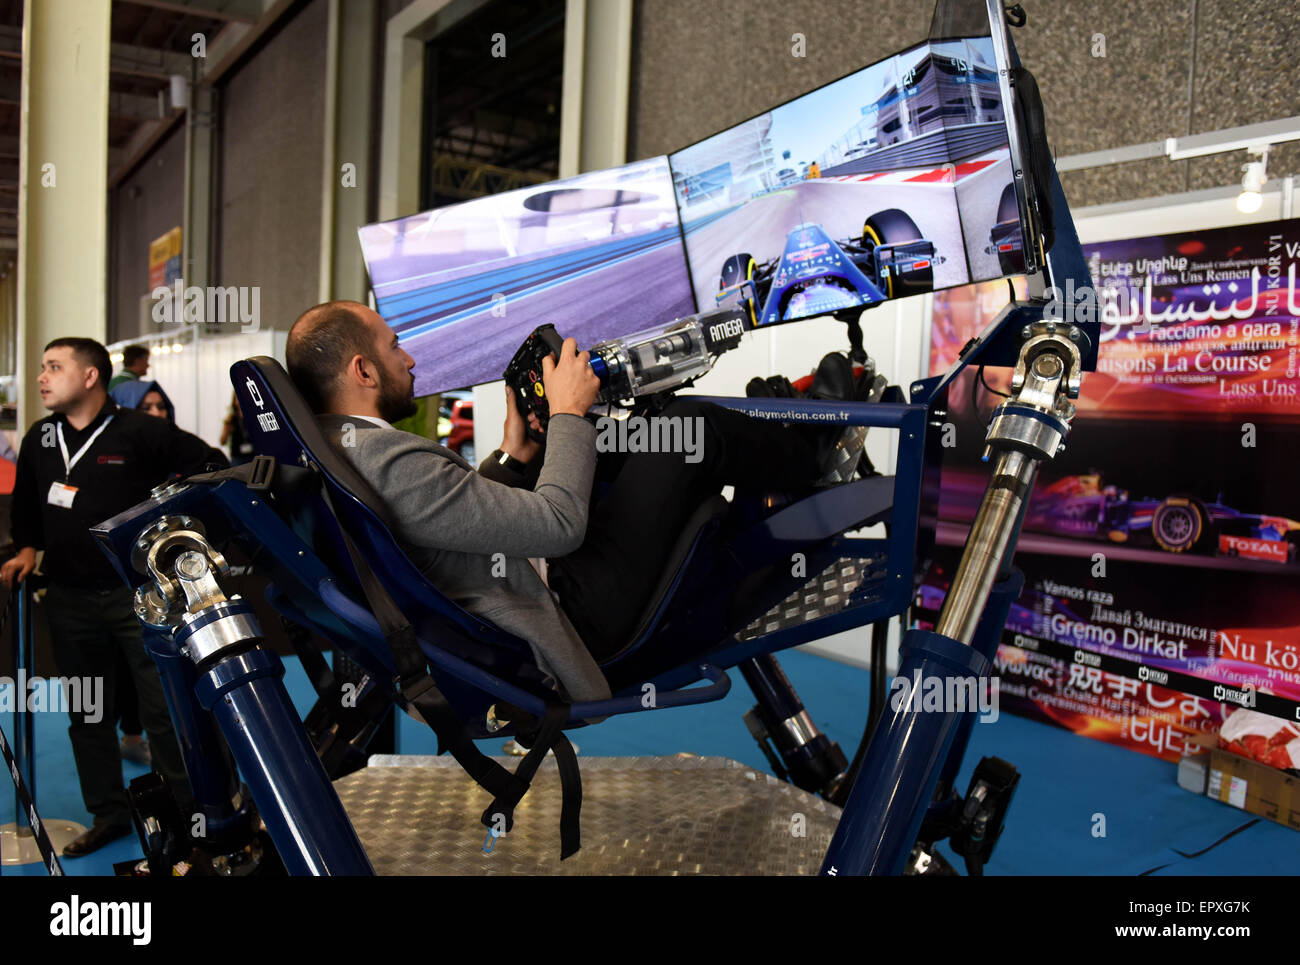 Istanbul, Turkey. 22nd May, 2015. A visitor experiences driving F1 racing car by auto game at Istanbul Autoshow 2015, Istanbul, Turkey, on May 22, 2015. Auto firms from the world displayed their cars including new energy vehicles at Istanbul Autoshow 2015 which was open on Friday. © He Canling/Xinhua/Alamy Live News Stock Photo